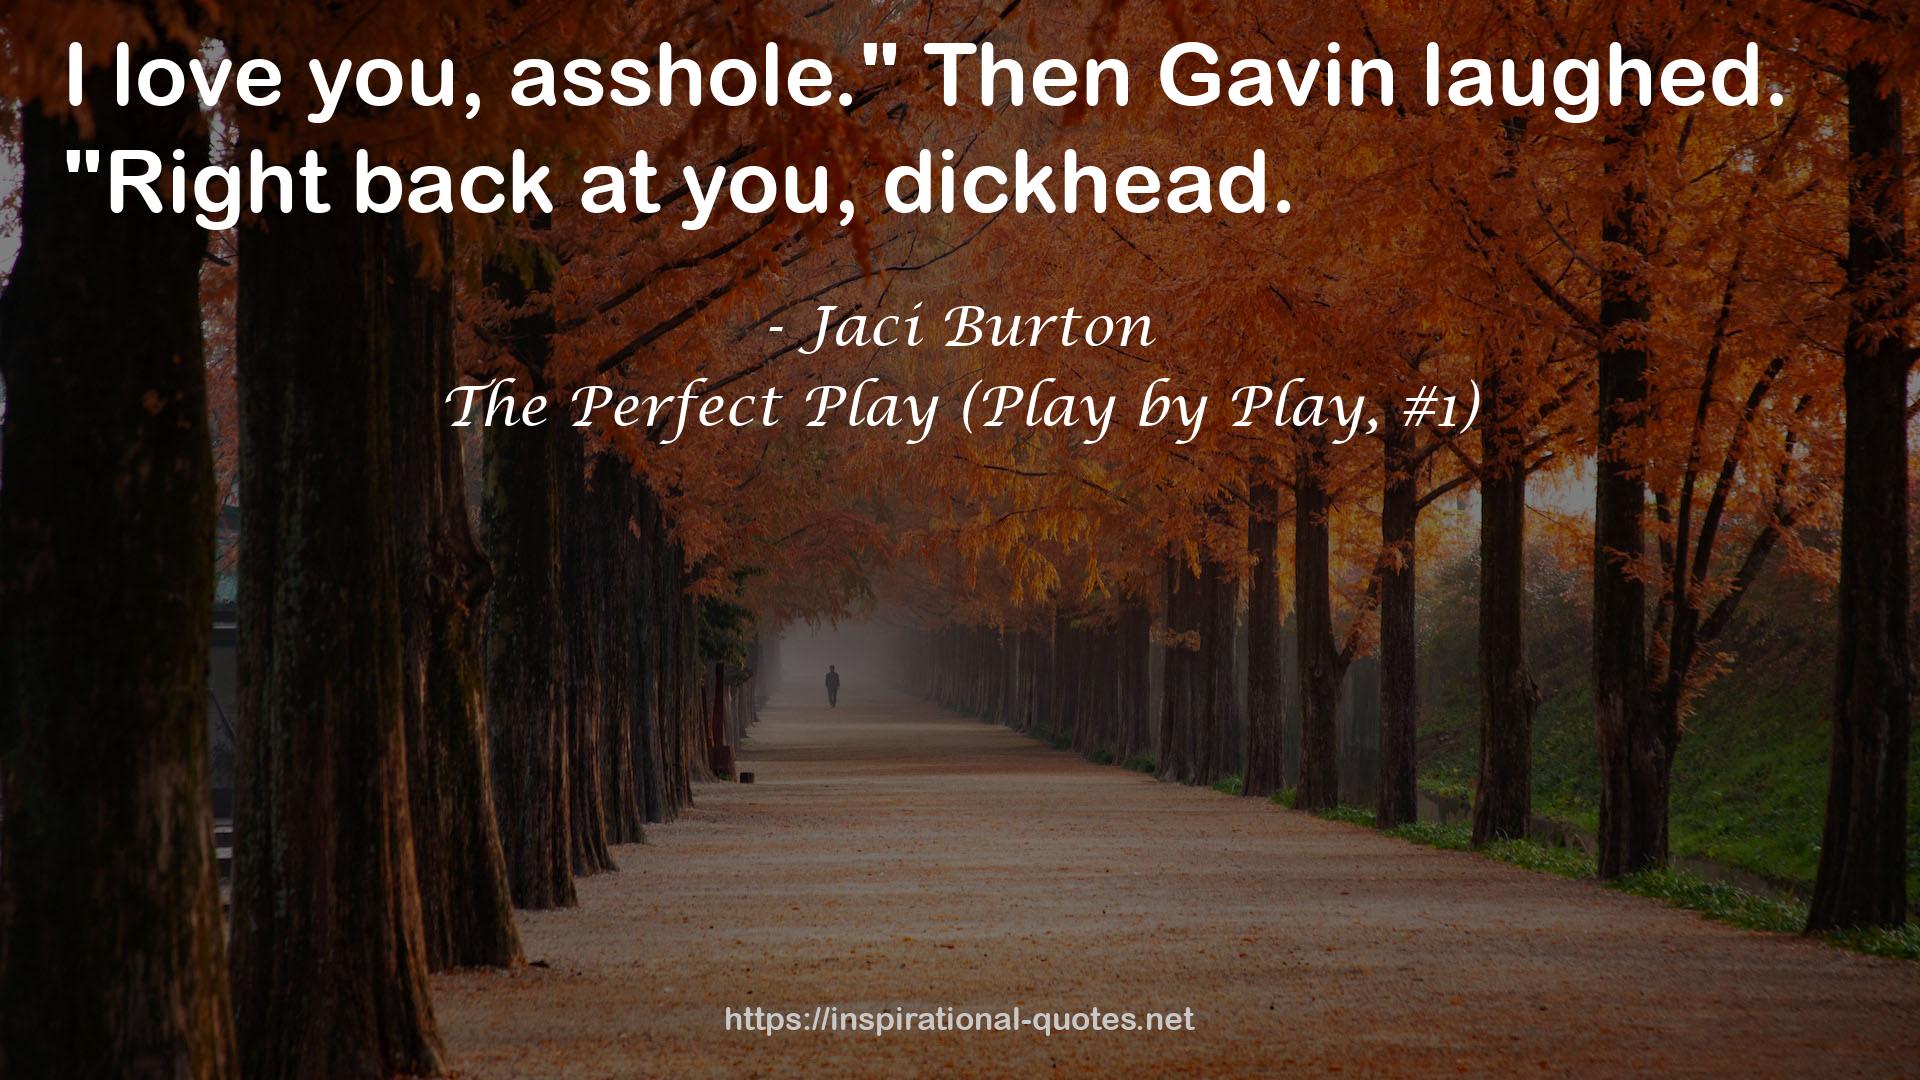 The Perfect Play (Play by Play, #1) QUOTES